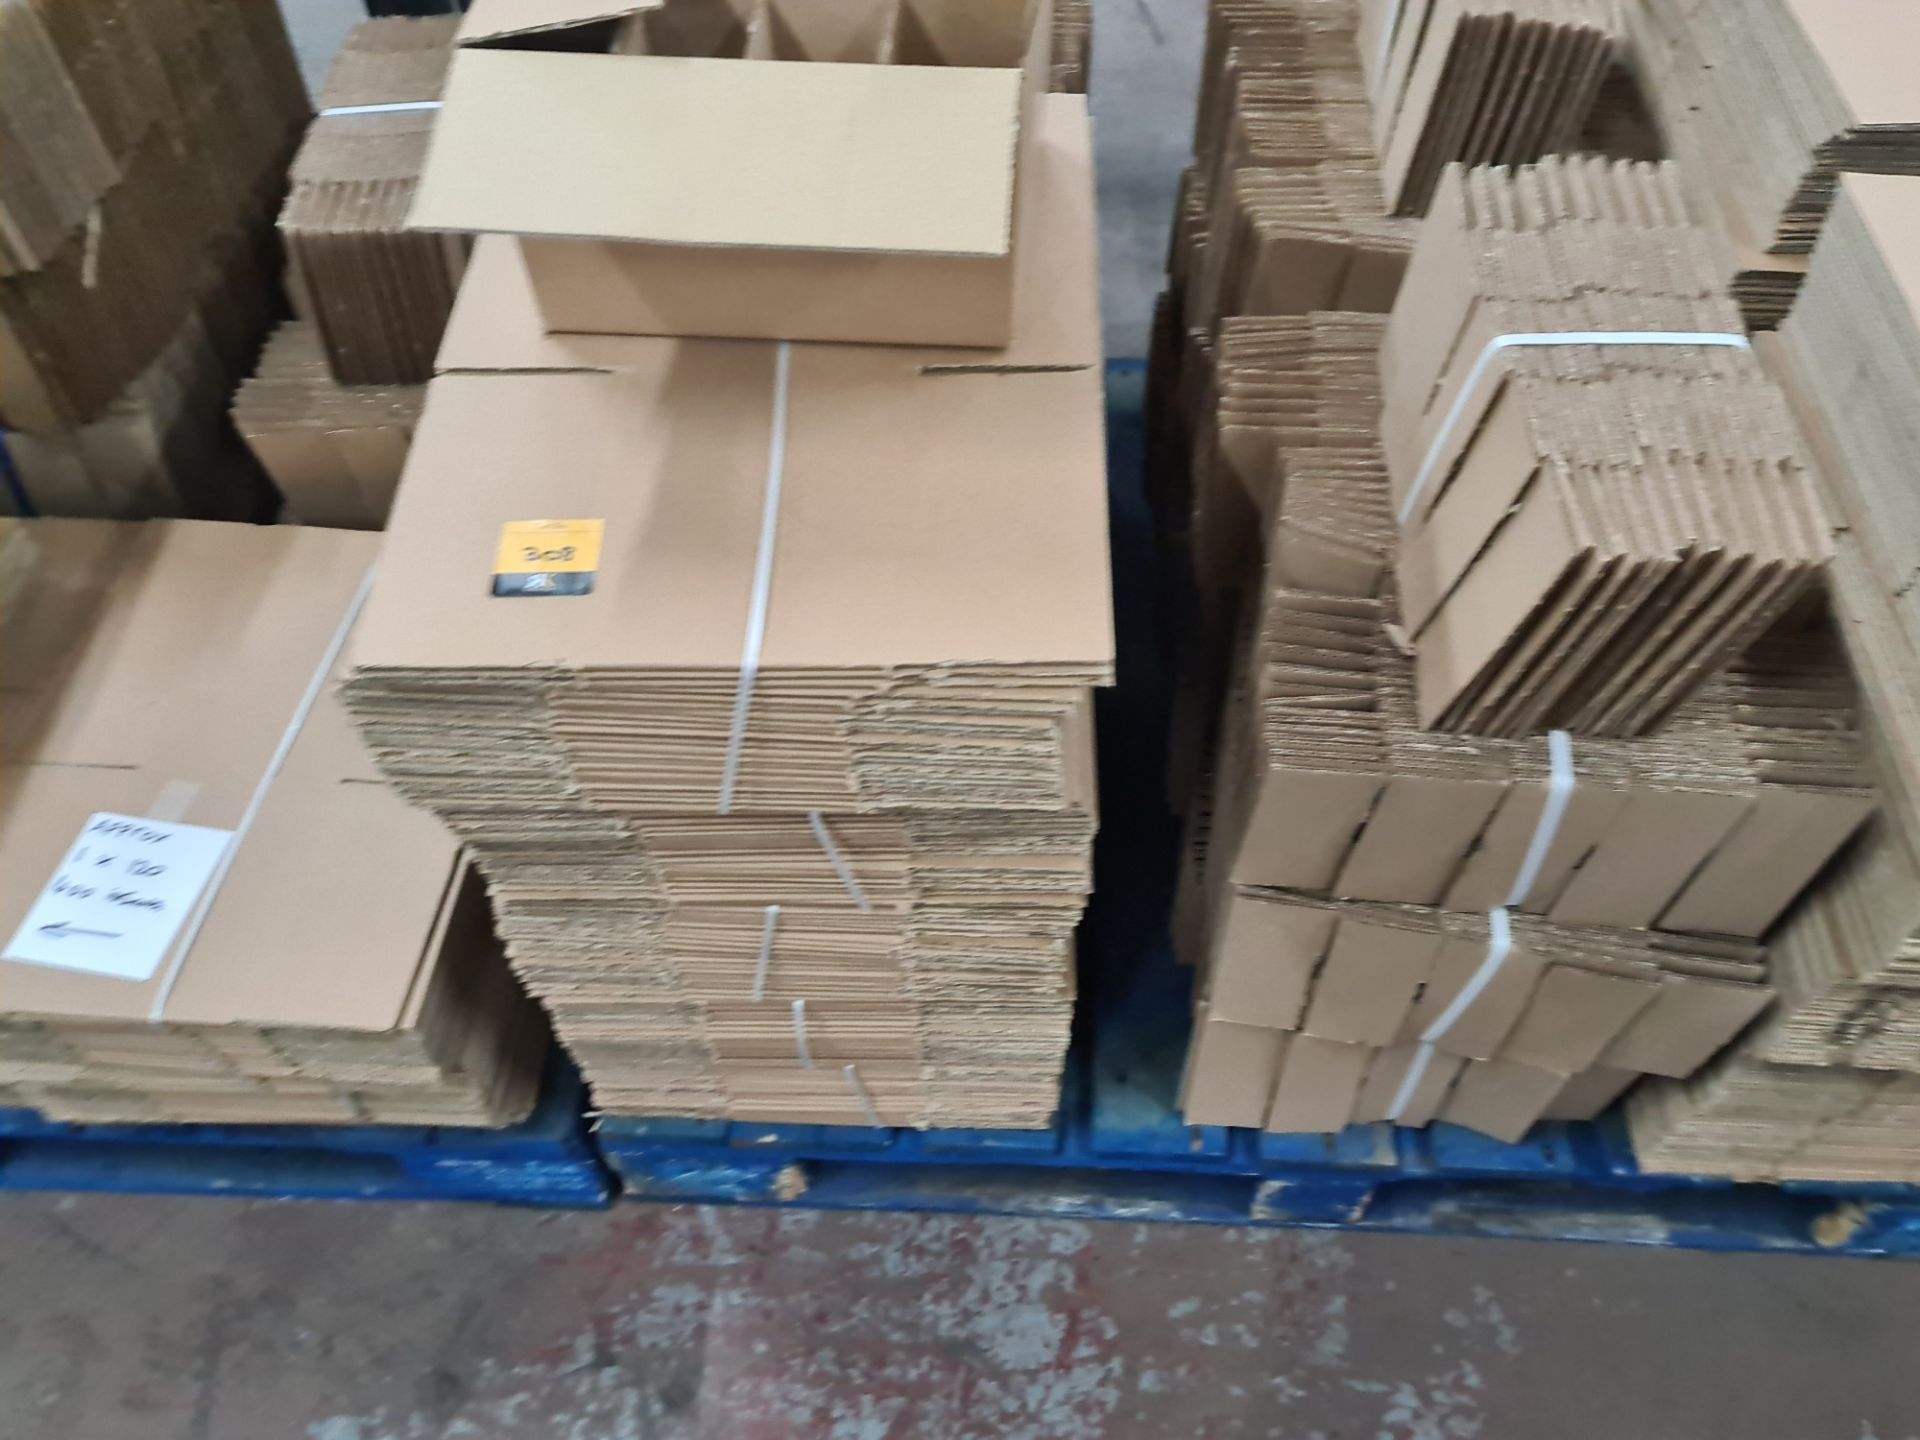 The contents of a pallet of cardboard boxes comprising approximately 300 boxes and 300 inserts in to - Image 3 of 8